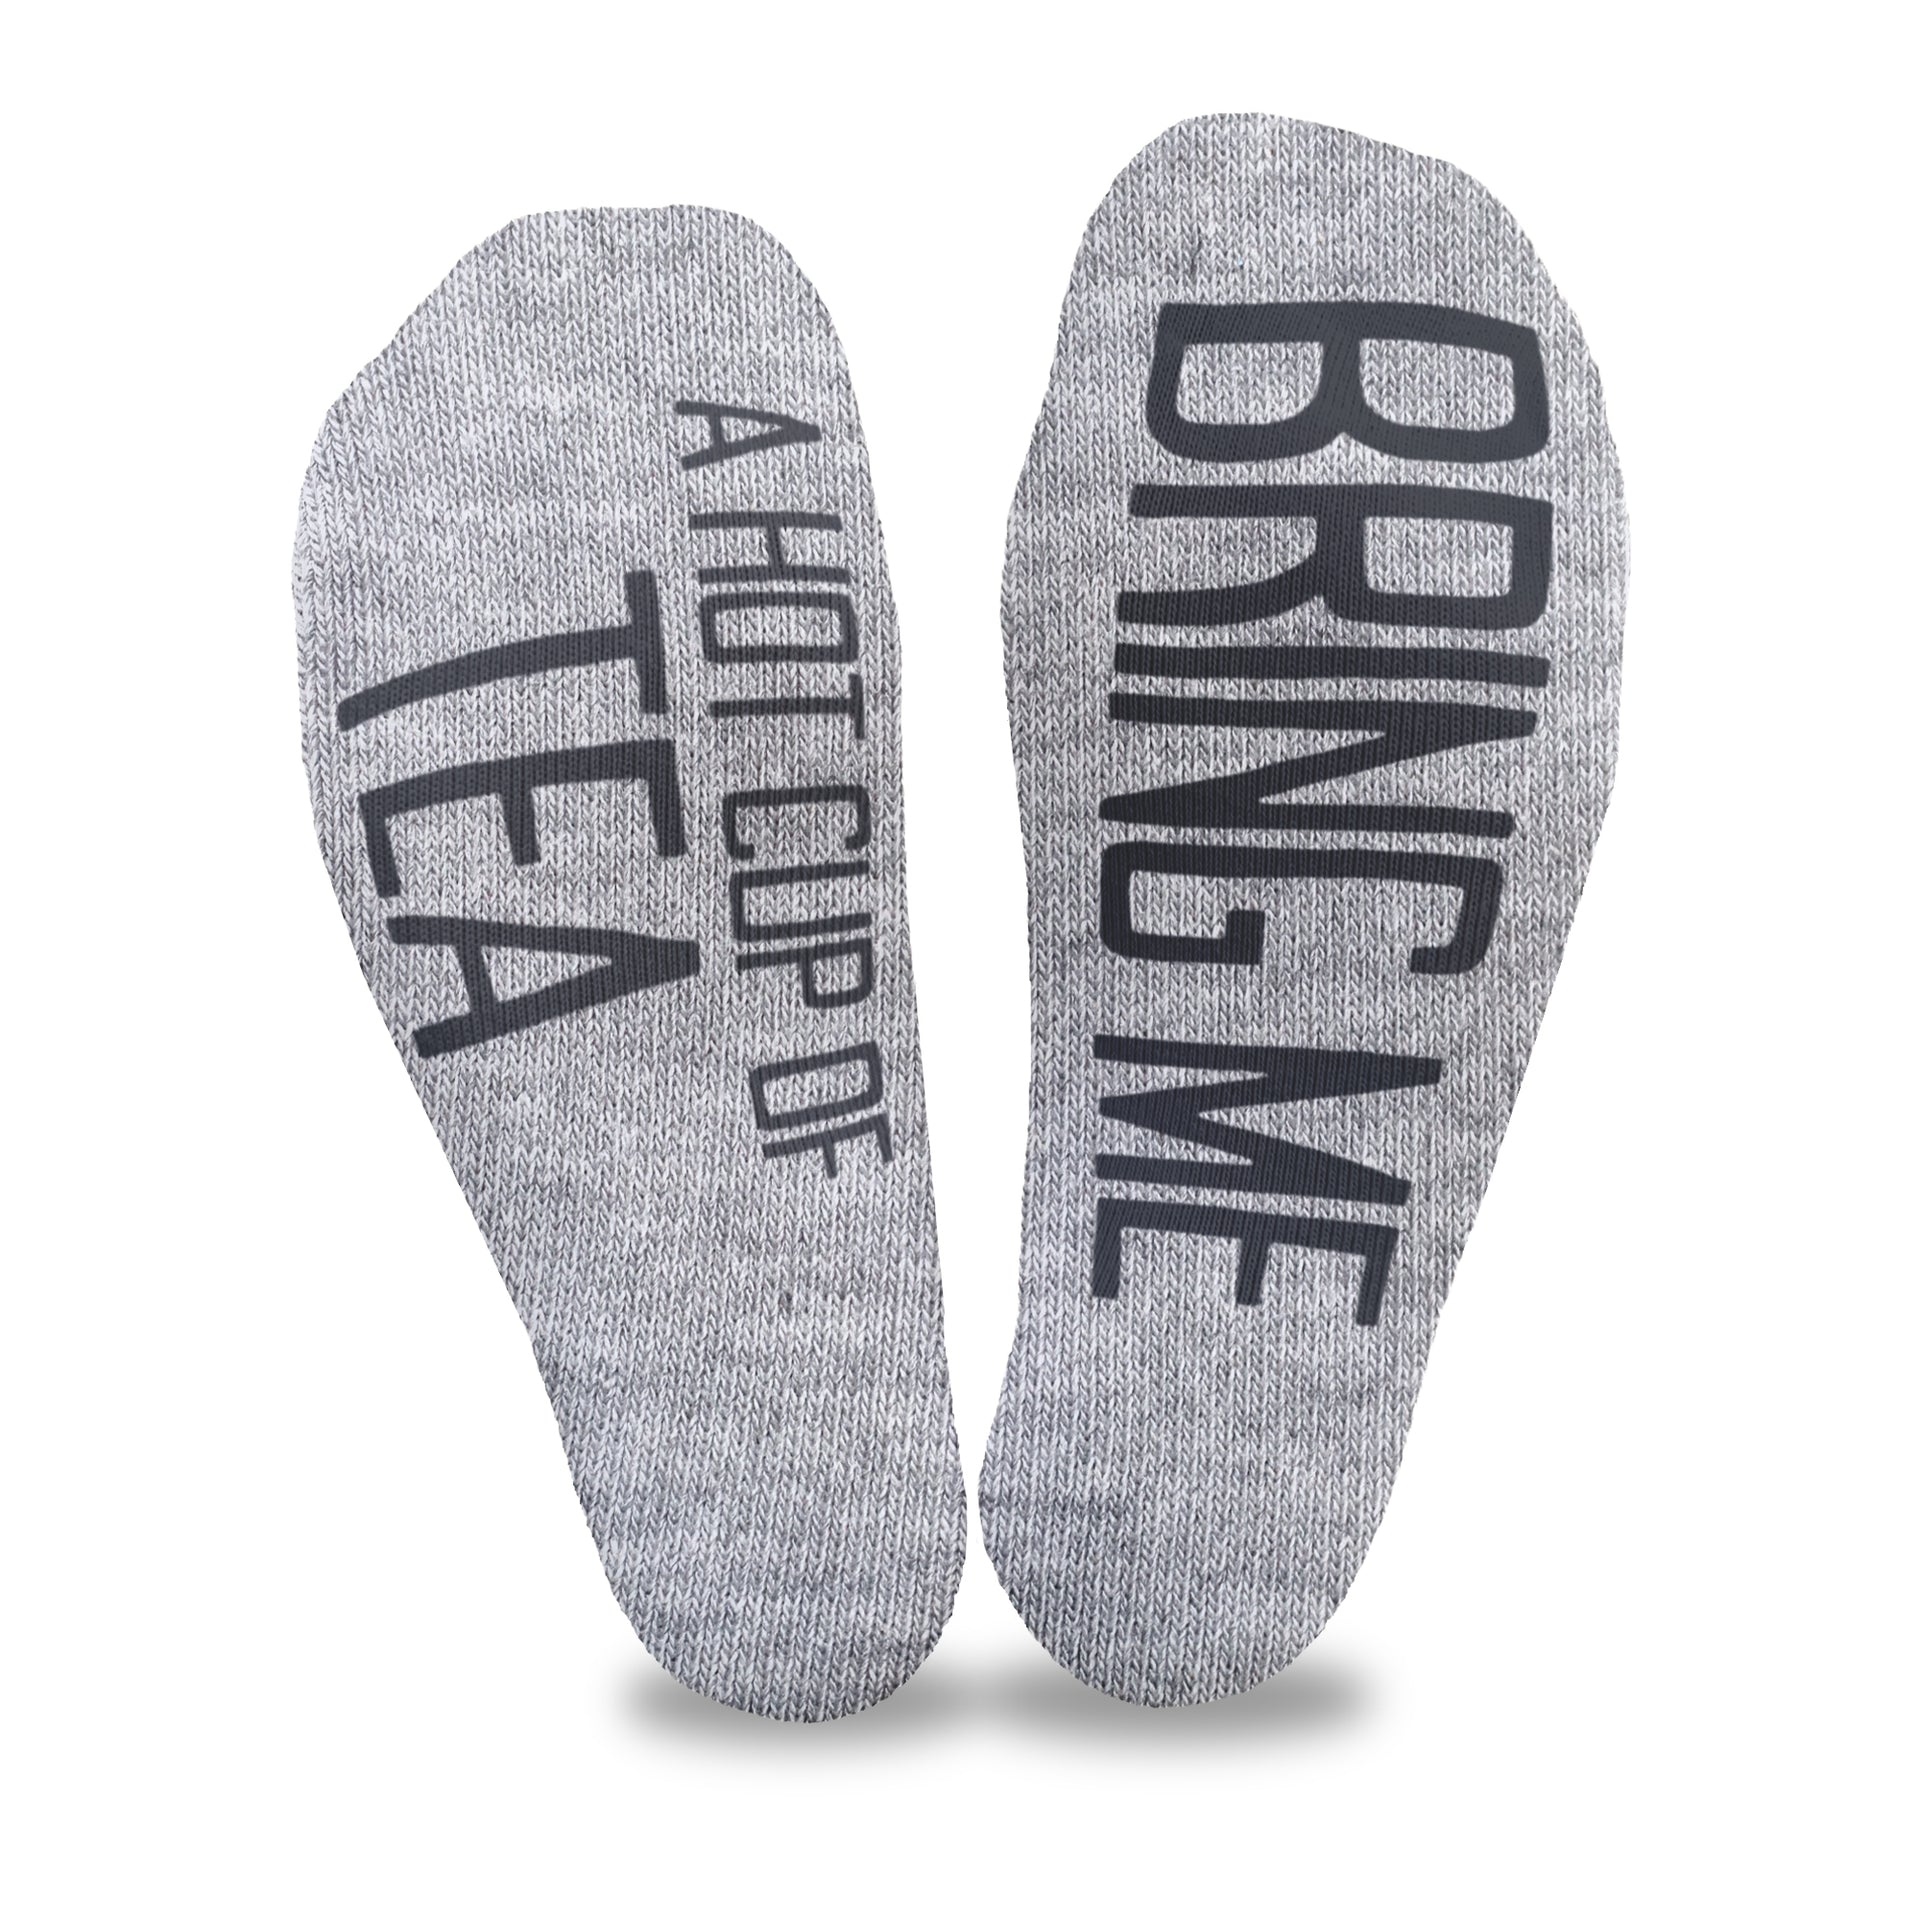 Bring me a cup of tea custom printed in black ink on the bottom soles of heather gray no show socks make a fun gift for any tea lover.